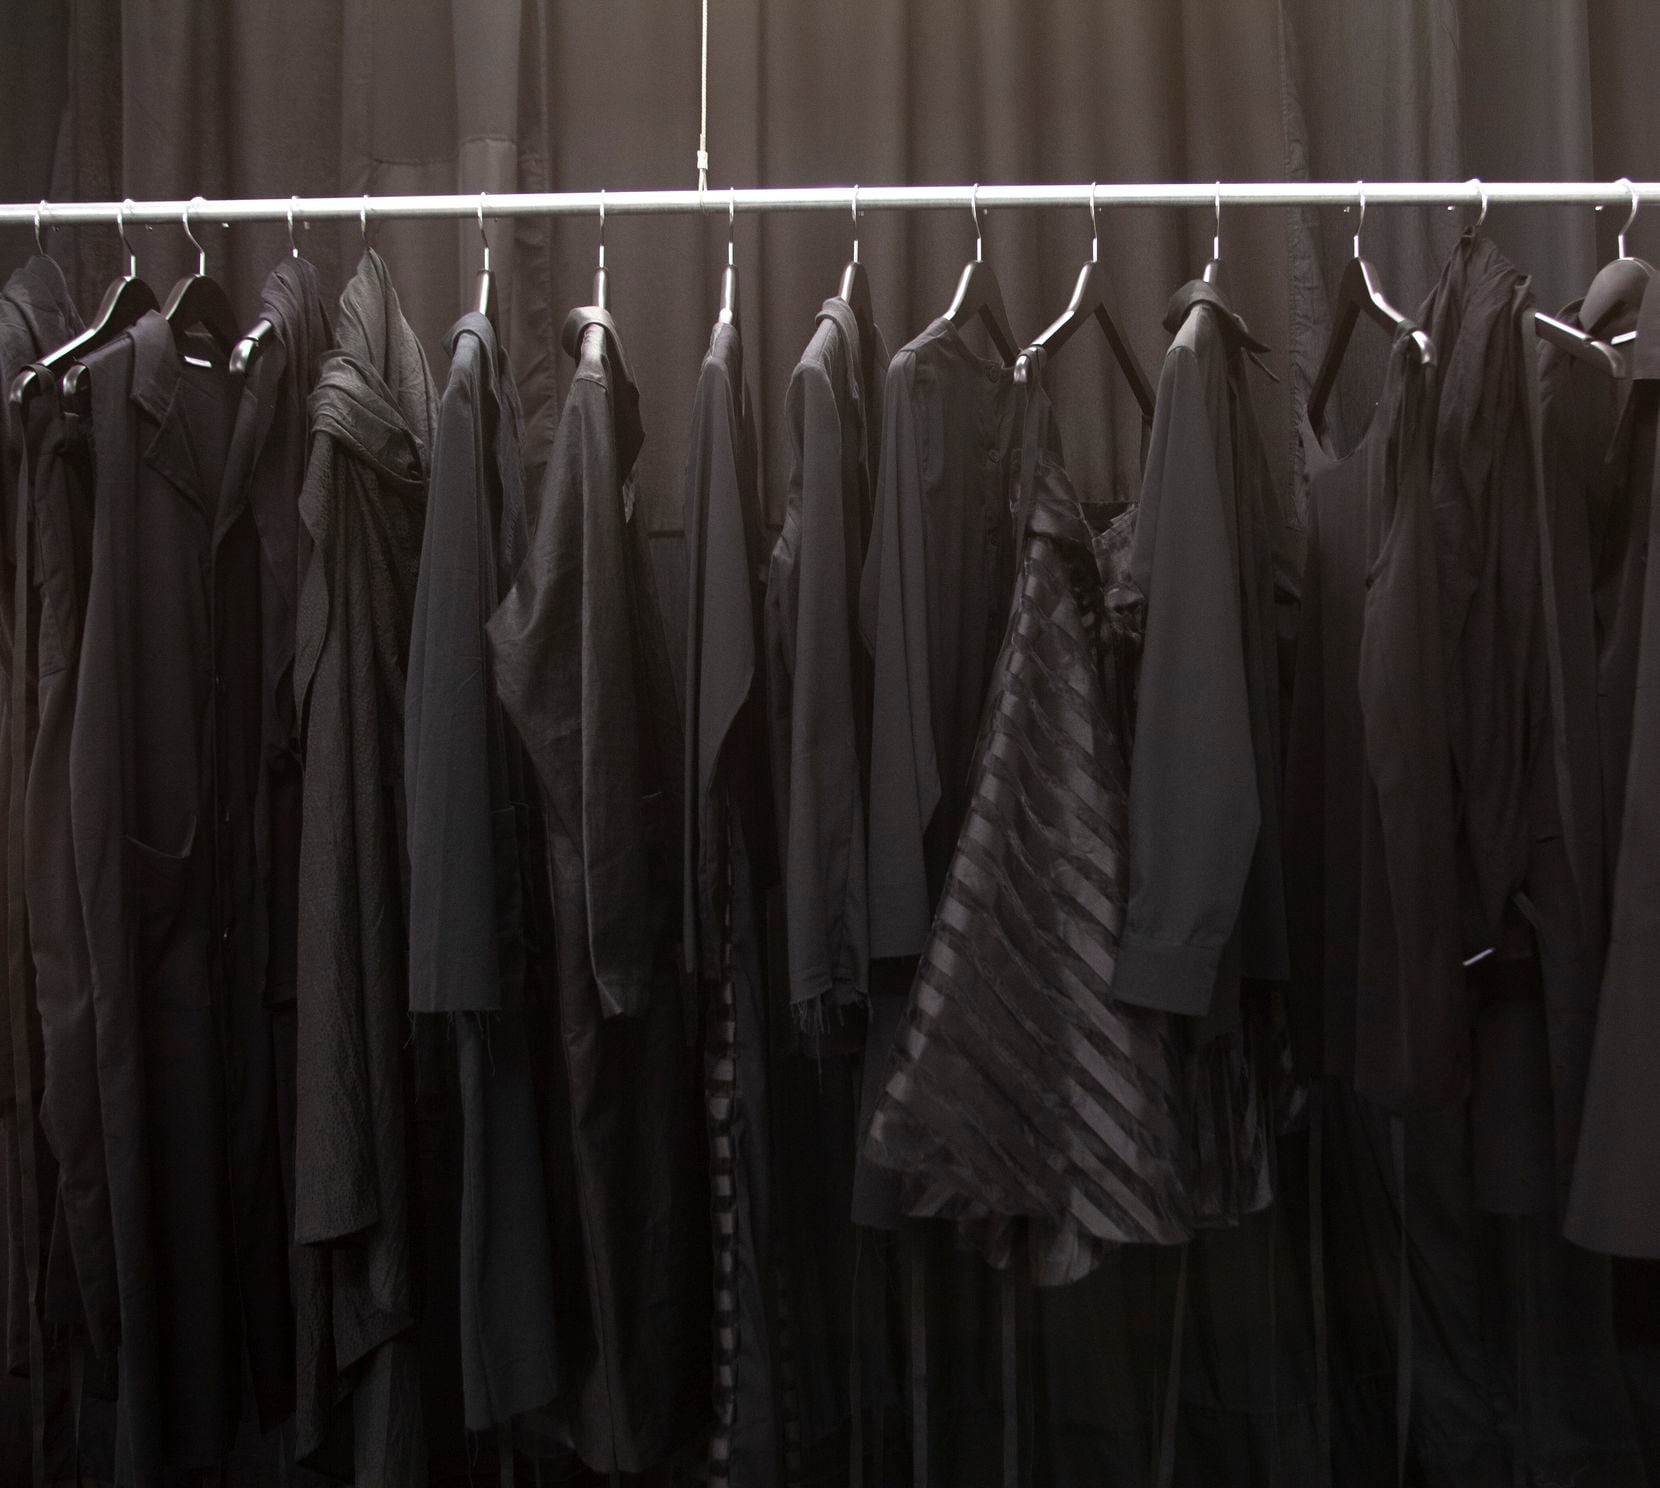 A clothing rack of black garments illustrates artist Joël Andrianomearisoa’s preferred color...